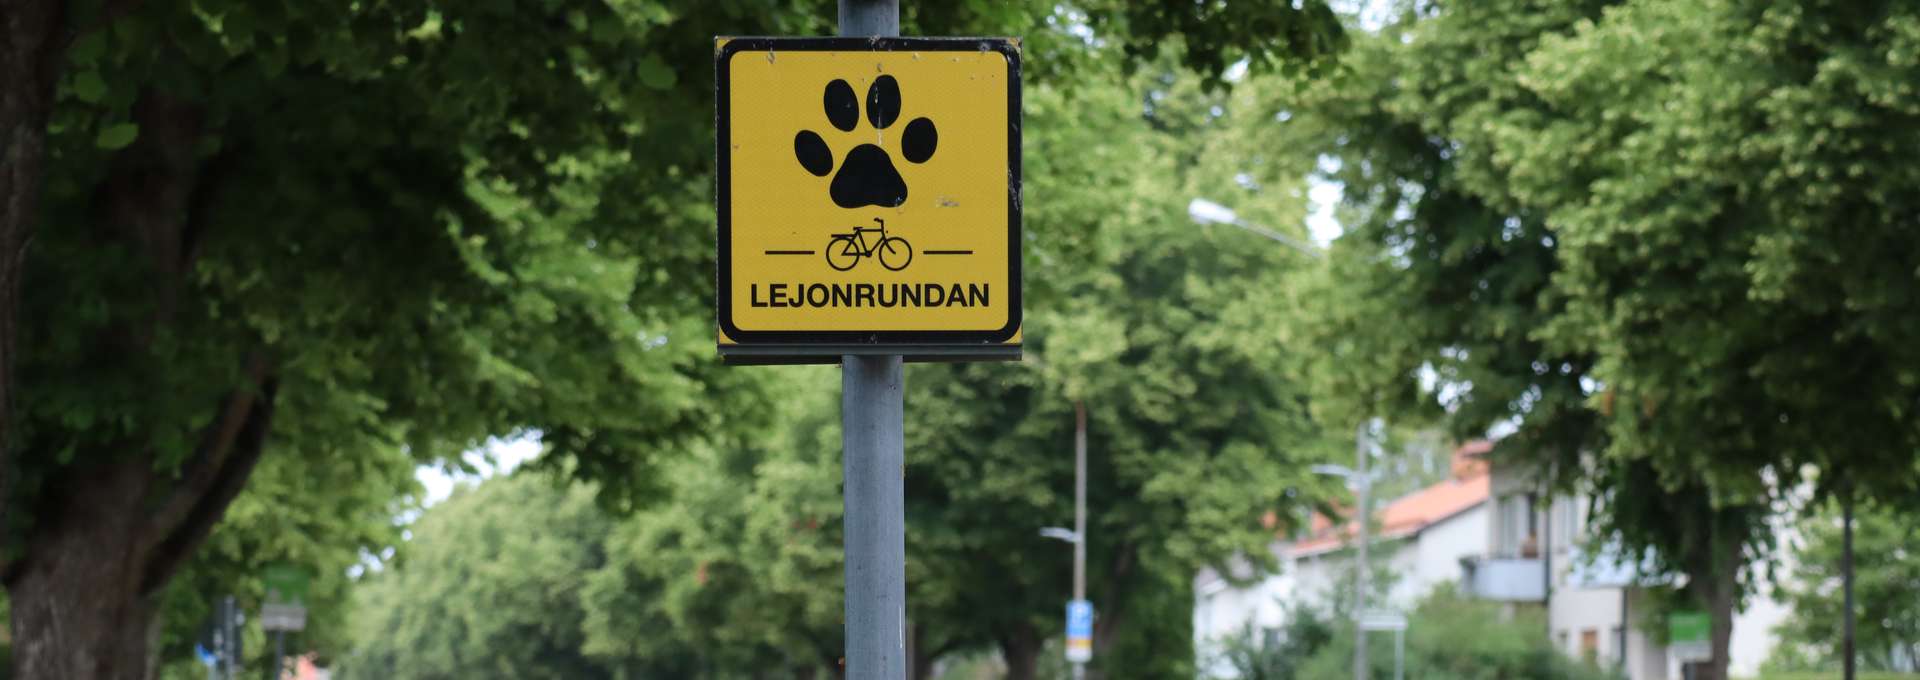 A yellow squared street sign saying Lejonrundan. In the background you can see three cyclists